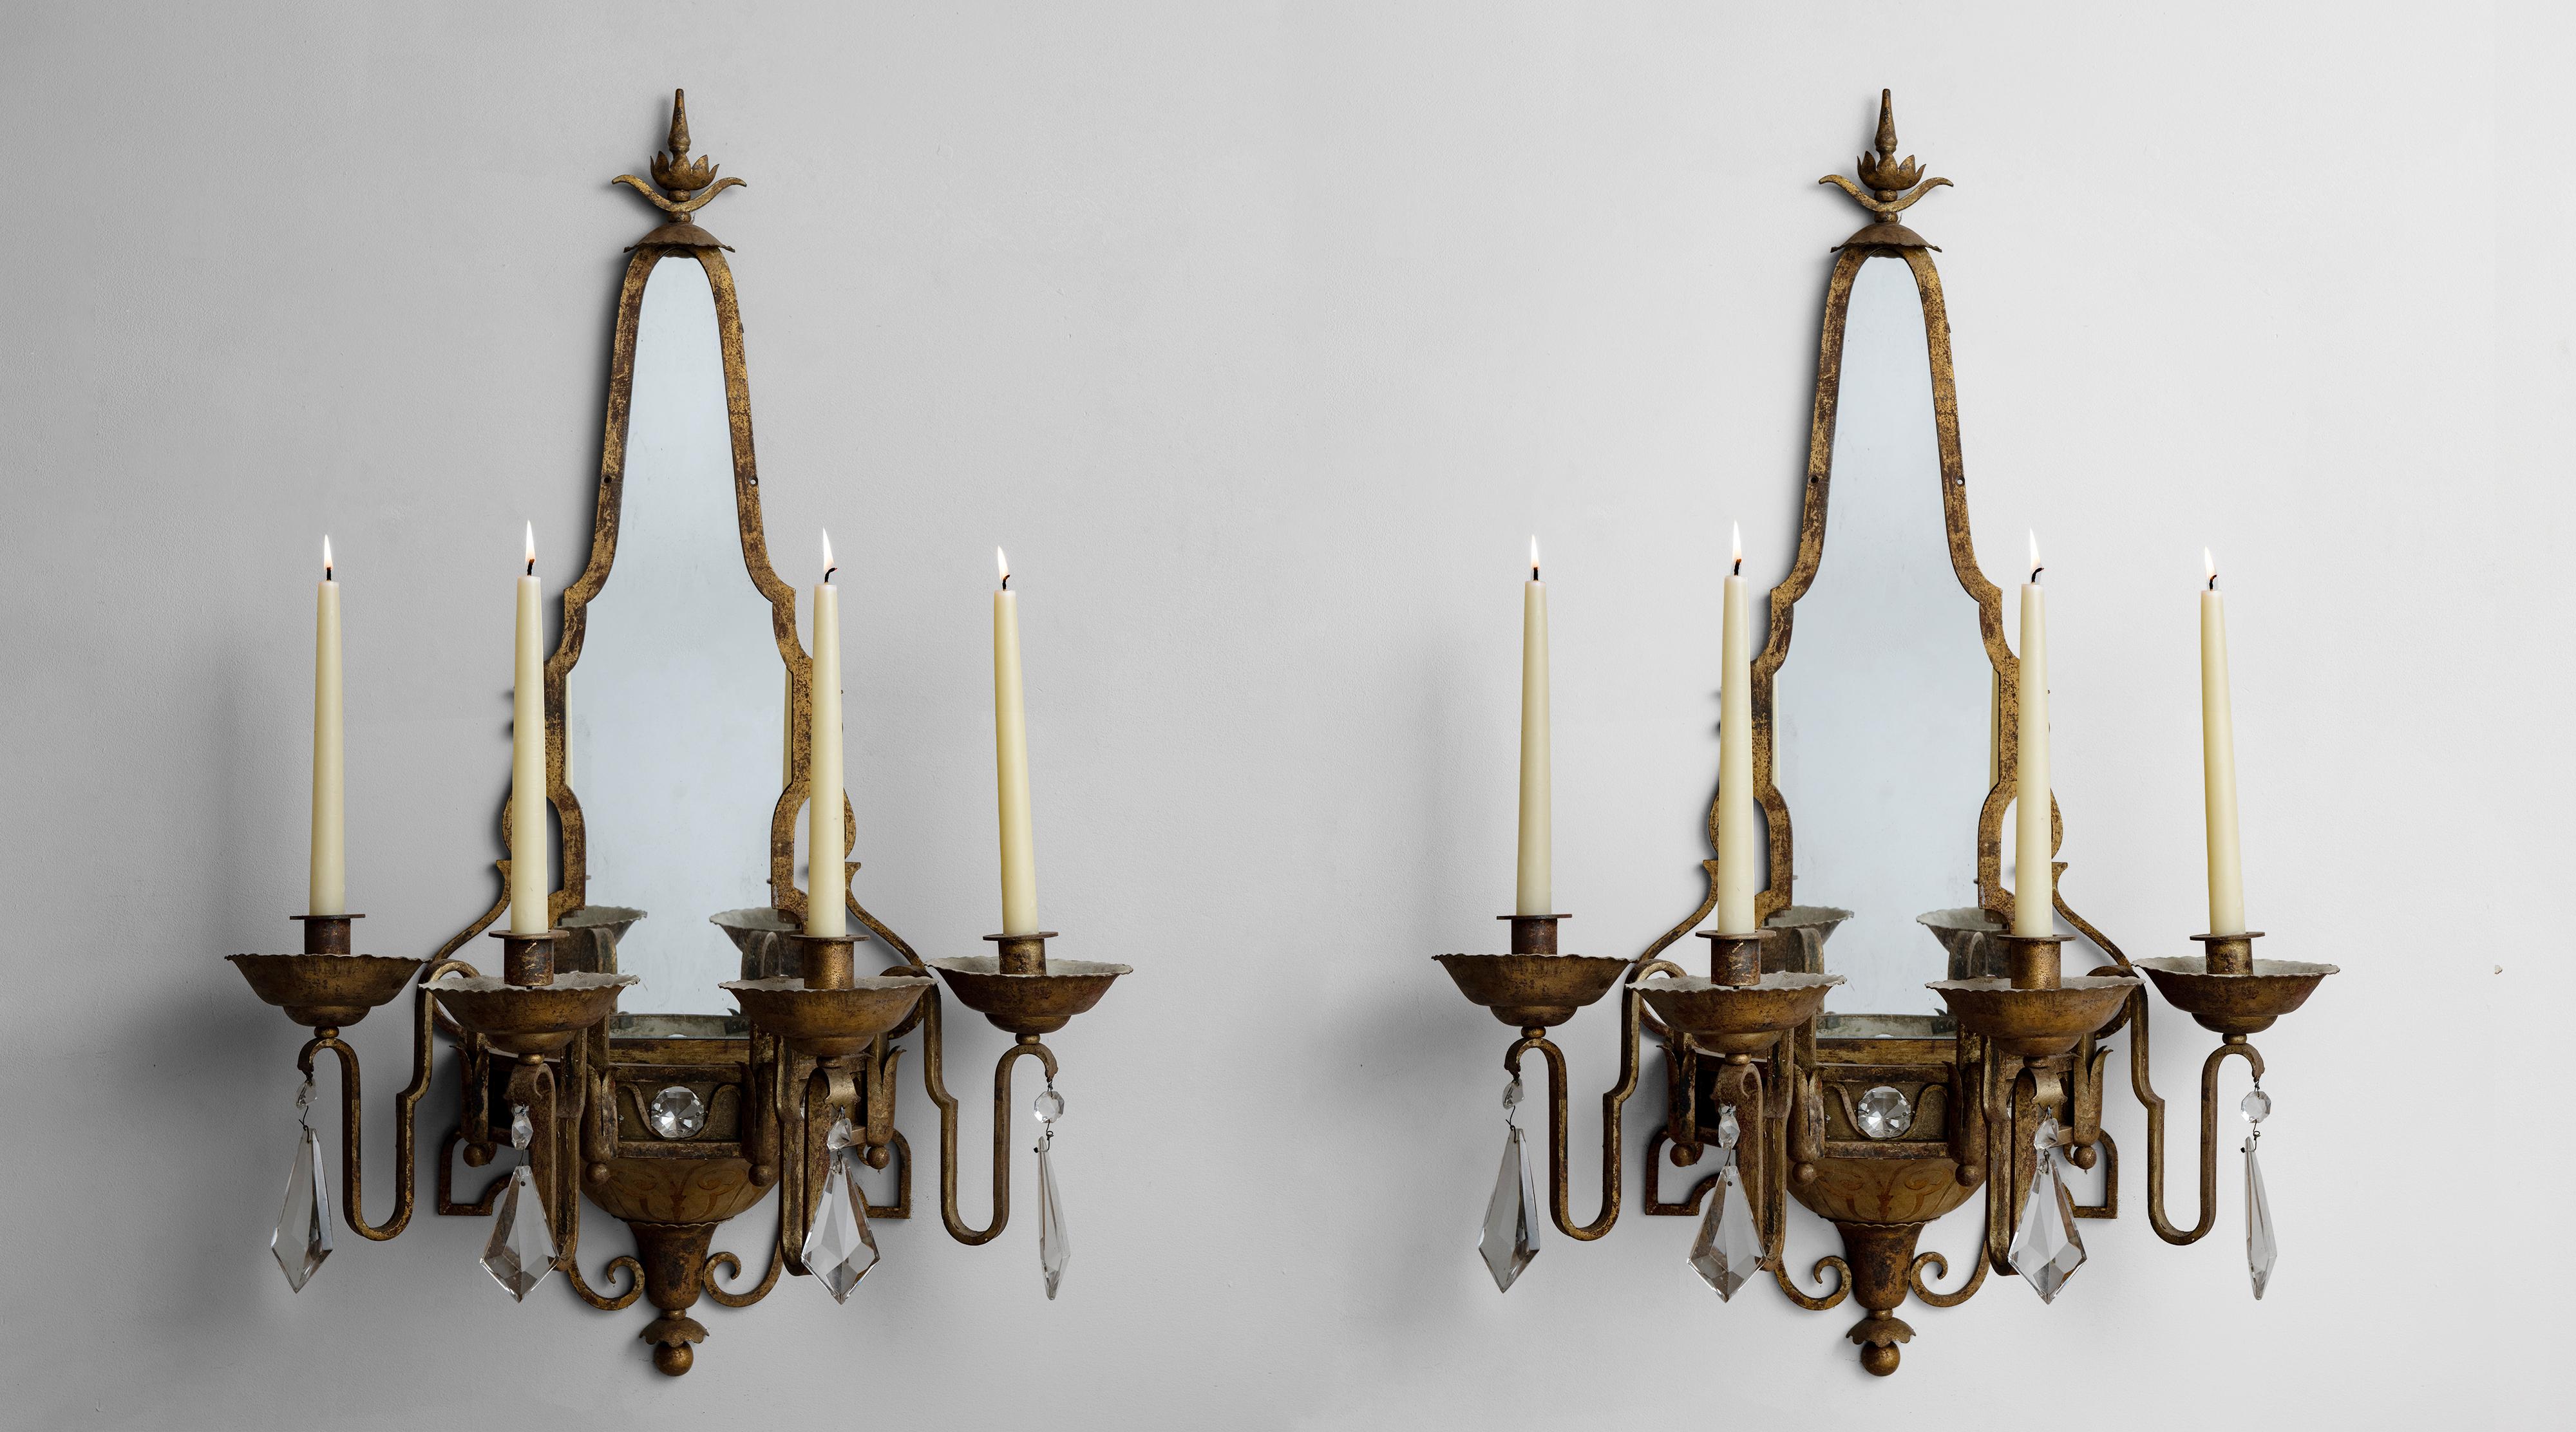 Mirrored sconces, France, circa 1940

Decorative brass and crystal wall sconces with (4) taper candles in front.

*Please note the price is per unit, and the lights are sold individually*